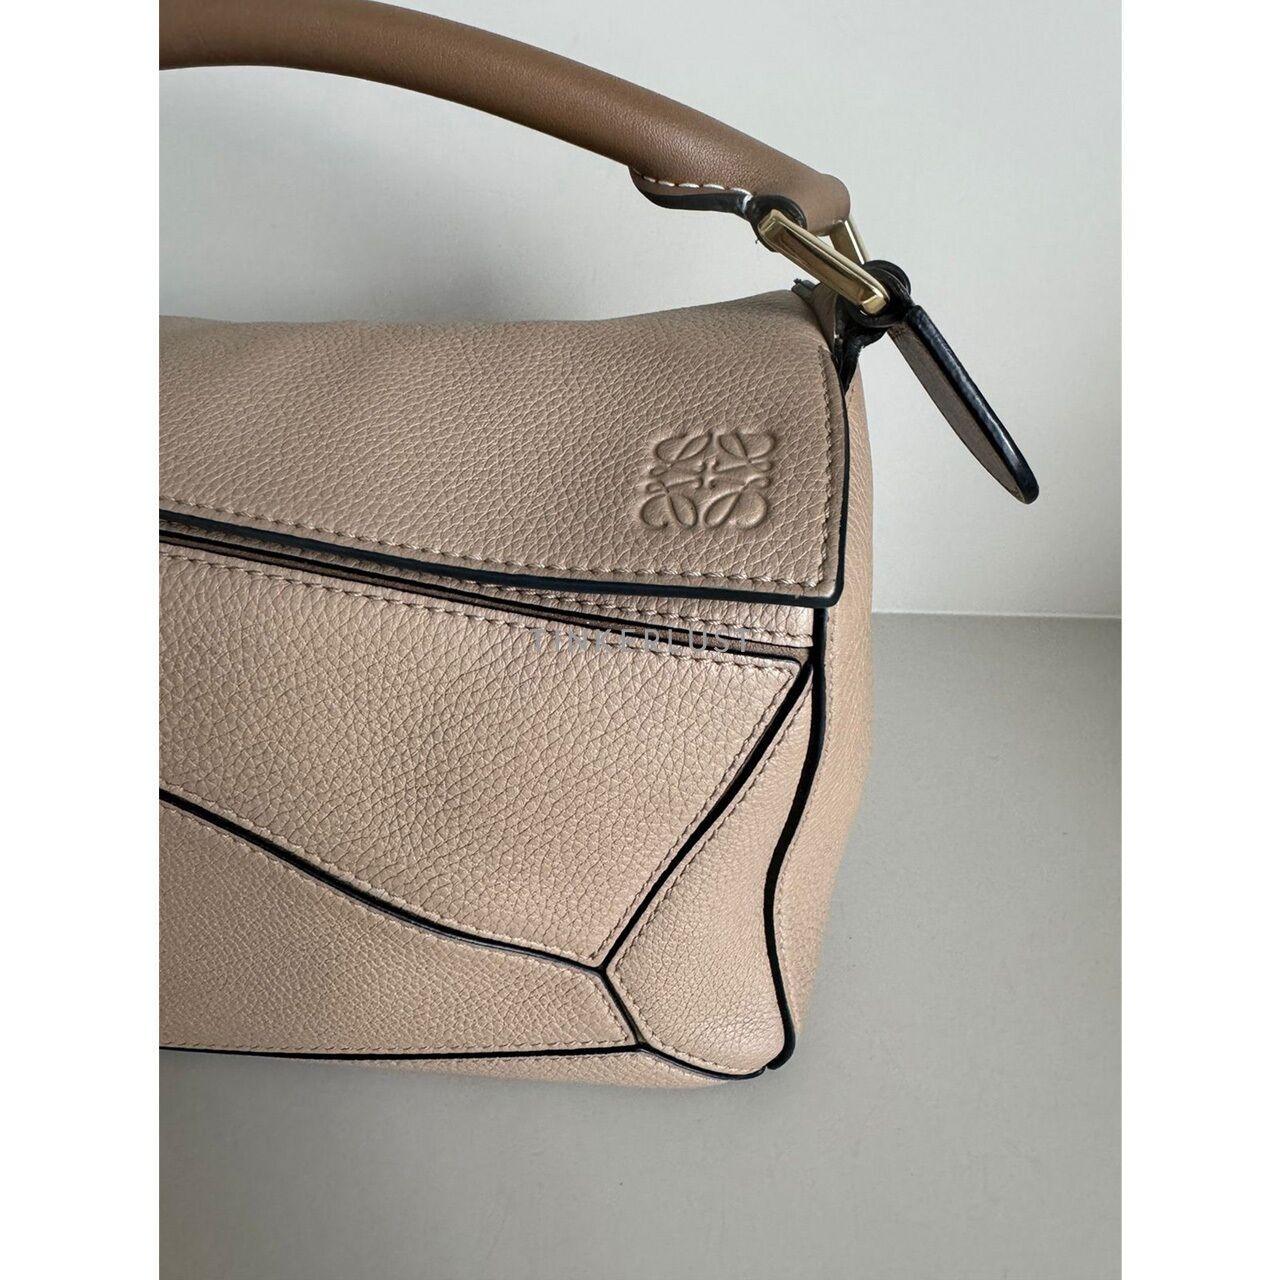 Loewe Puzzle Small Taupe 2 Tone Satchel